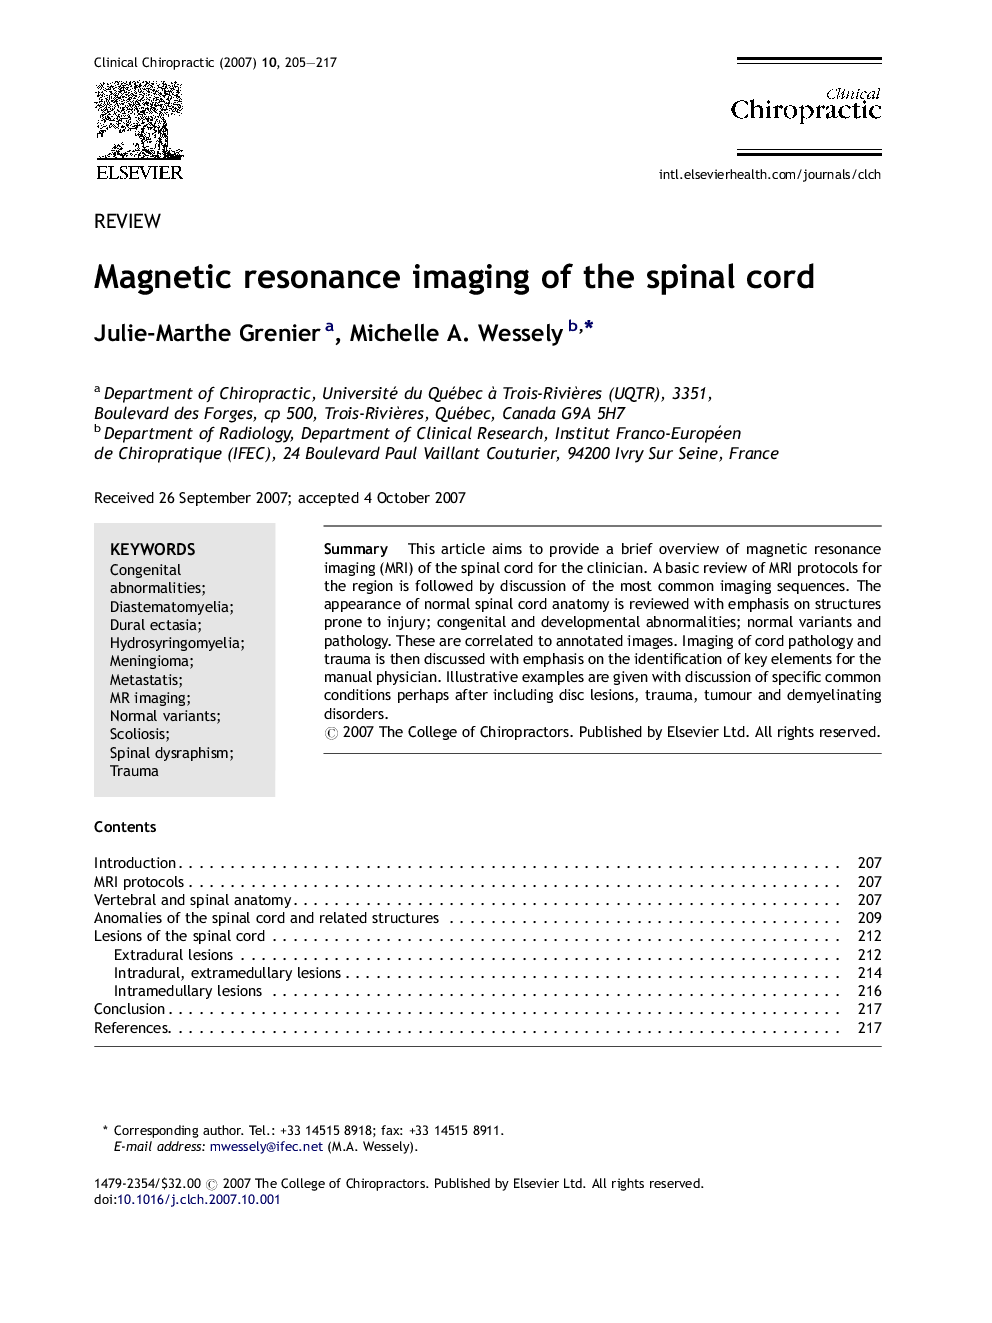 Magnetic resonance imaging of the spinal cord